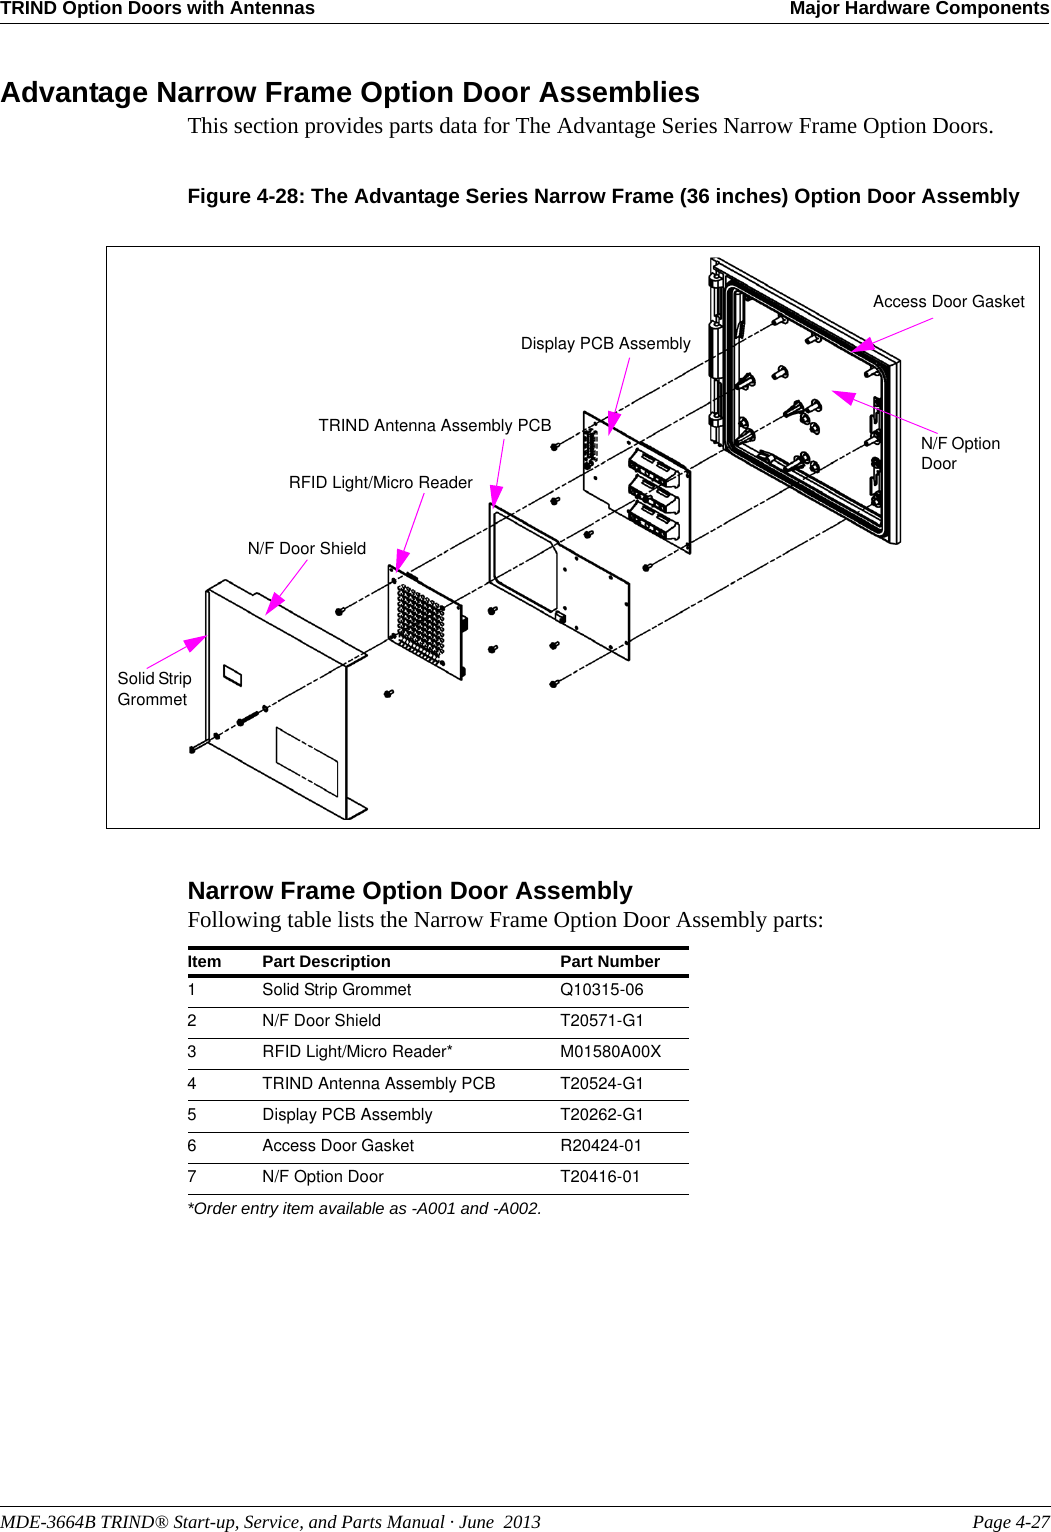 MDE-3664B TRIND® Start-up, Service, and Parts Manual · June  2013 Page 4-27TRIND Option Doors with Antennas Major Hardware ComponentsAdvantage Narrow Frame Option Door AssembliesThis section provides parts data for The Advantage Series Narrow Frame Option Doors.Figure 4-28: The Advantage Series Narrow Frame (36 inches) Option Door AssemblyN/F Option DoorAccess Door GasketDisplay PCB AssemblyTRIND Antenna Assembly PCBRFID Light/Micro ReaderN/F Door ShieldSolid Strip GrommetNarrow Frame Option Door AssemblyFollowing table lists the Narrow Frame Option Door Assembly parts:Item Part Description Part Number1Solid Strip Grommet Q10315-062N/F Door Shield T20571-G13RFID Light/Micro Reader* M01580A00X4TRIND Antenna Assembly PCB T20524-G15Display PCB Assembly T20262-G16Access Door Gasket R20424-017N/F Option Door T20416-01*Order entry item available as -A001 and -A002.